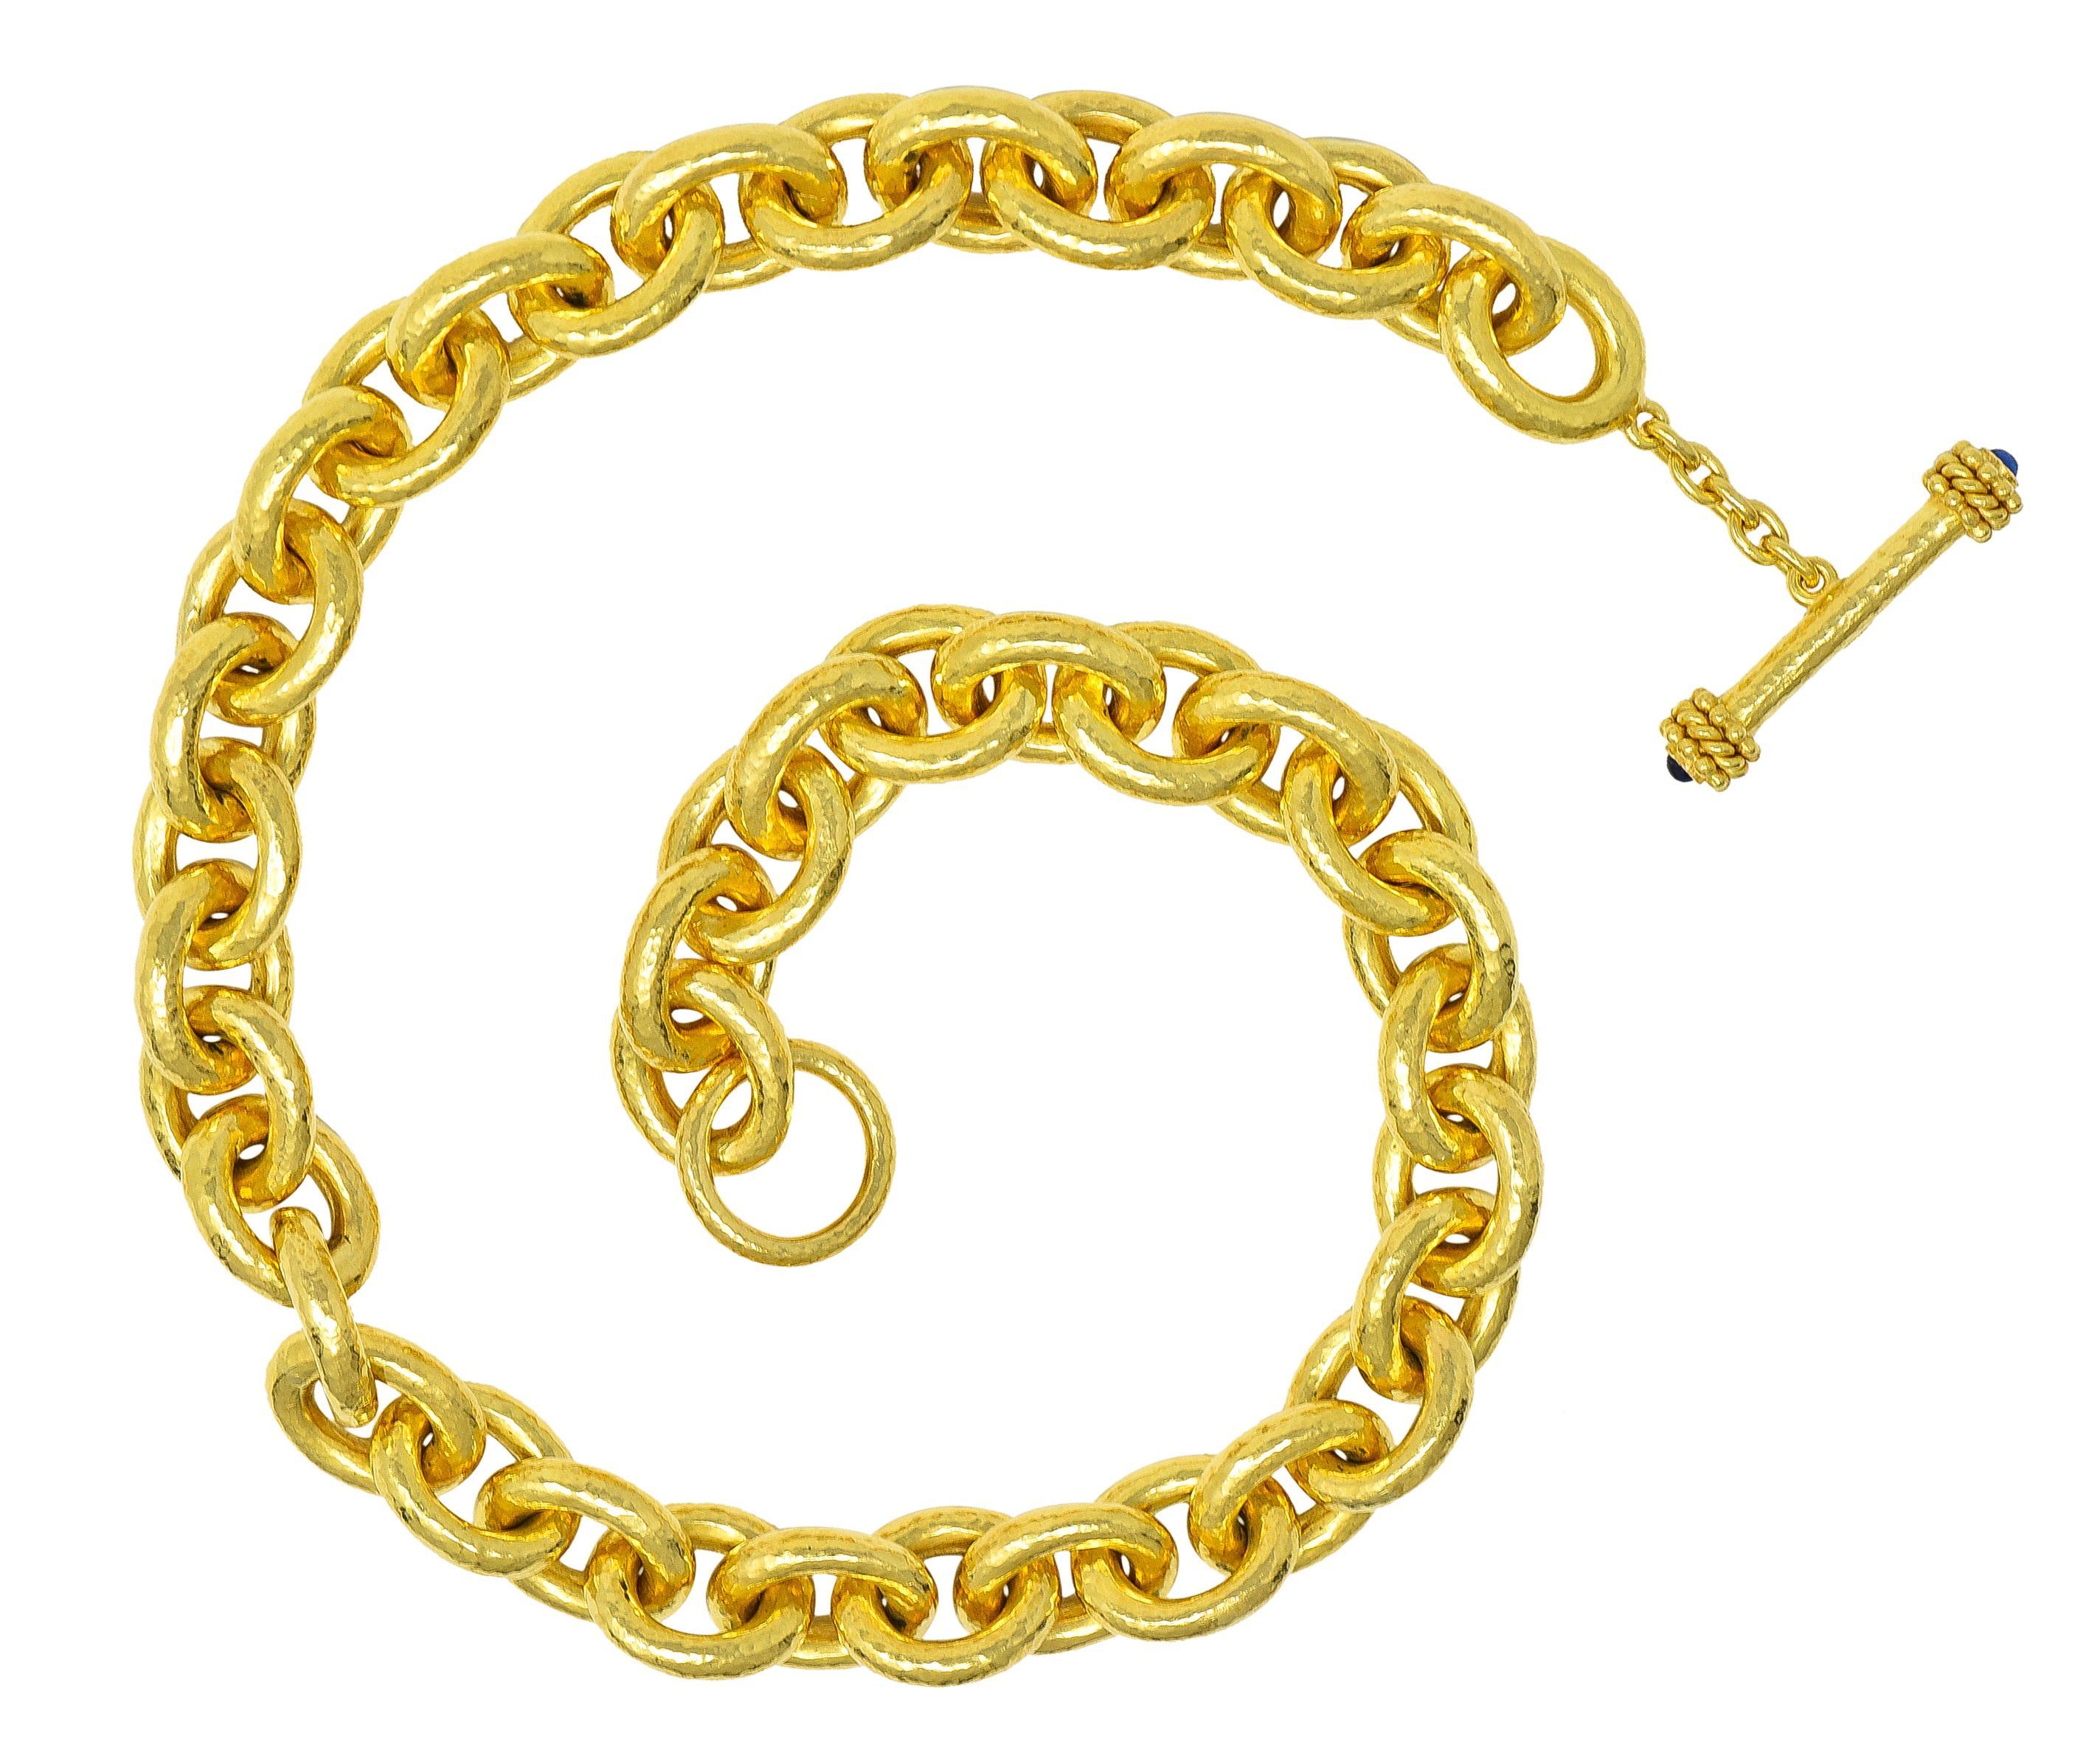 Designed as a cable link chain comprised of large oval-shaped links 
With very fine hammered texture throughout 
Completed by a stylized toggle clasp closure 
With gold bead and twisted rope terminals 
Capped with 3.0 mm round sapphire